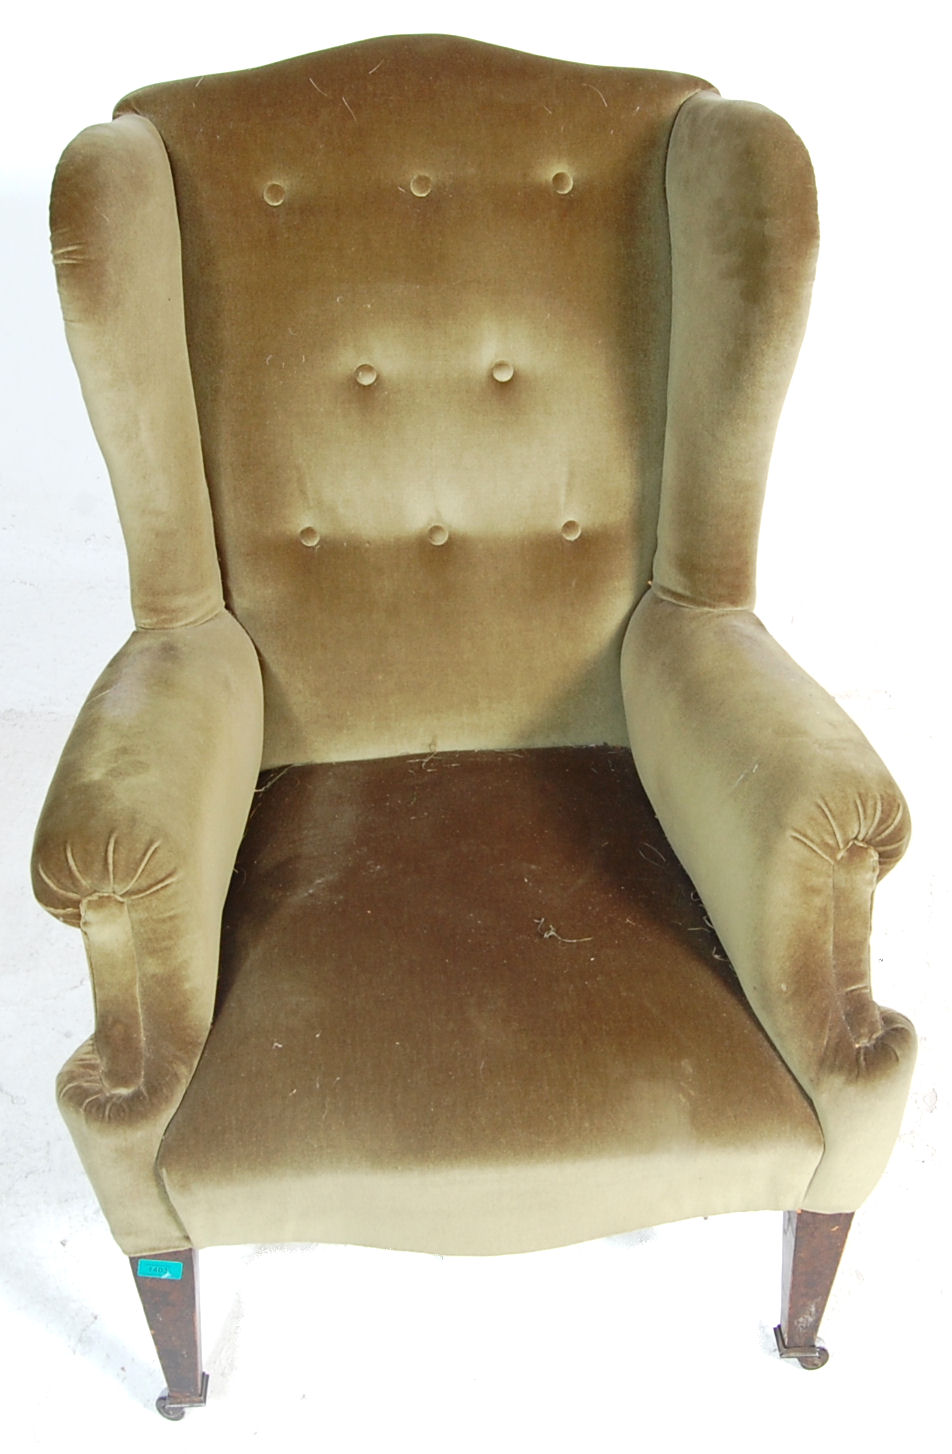 ANTIQUE EDWARDIAN QUEEN ANNE STYLE ARMCHAIR - Image 3 of 4